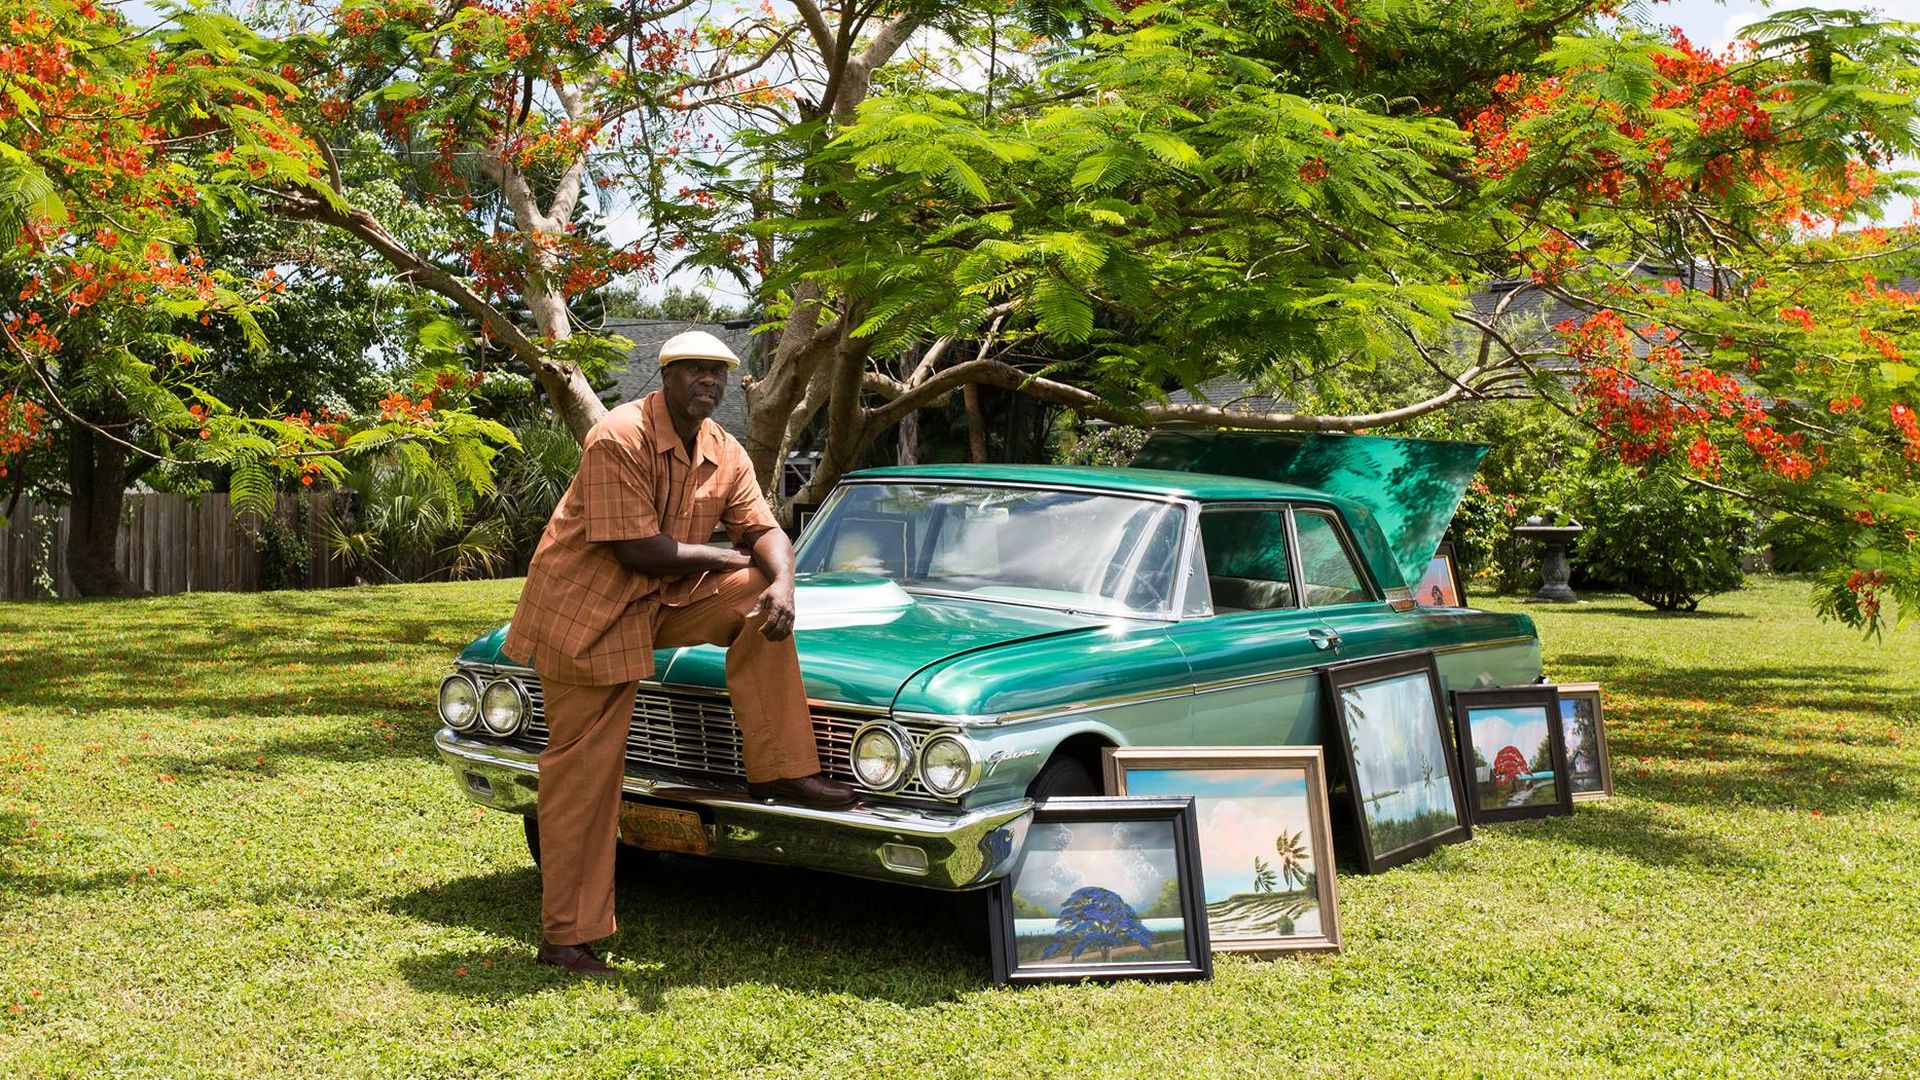 A man in a brow button down, pants and newspaper boy cap leaning on a blue-green vintage car. Several framed paintings of Florida landscapes lean against the car. A royal poinciana tree blooms red flowers in the background.